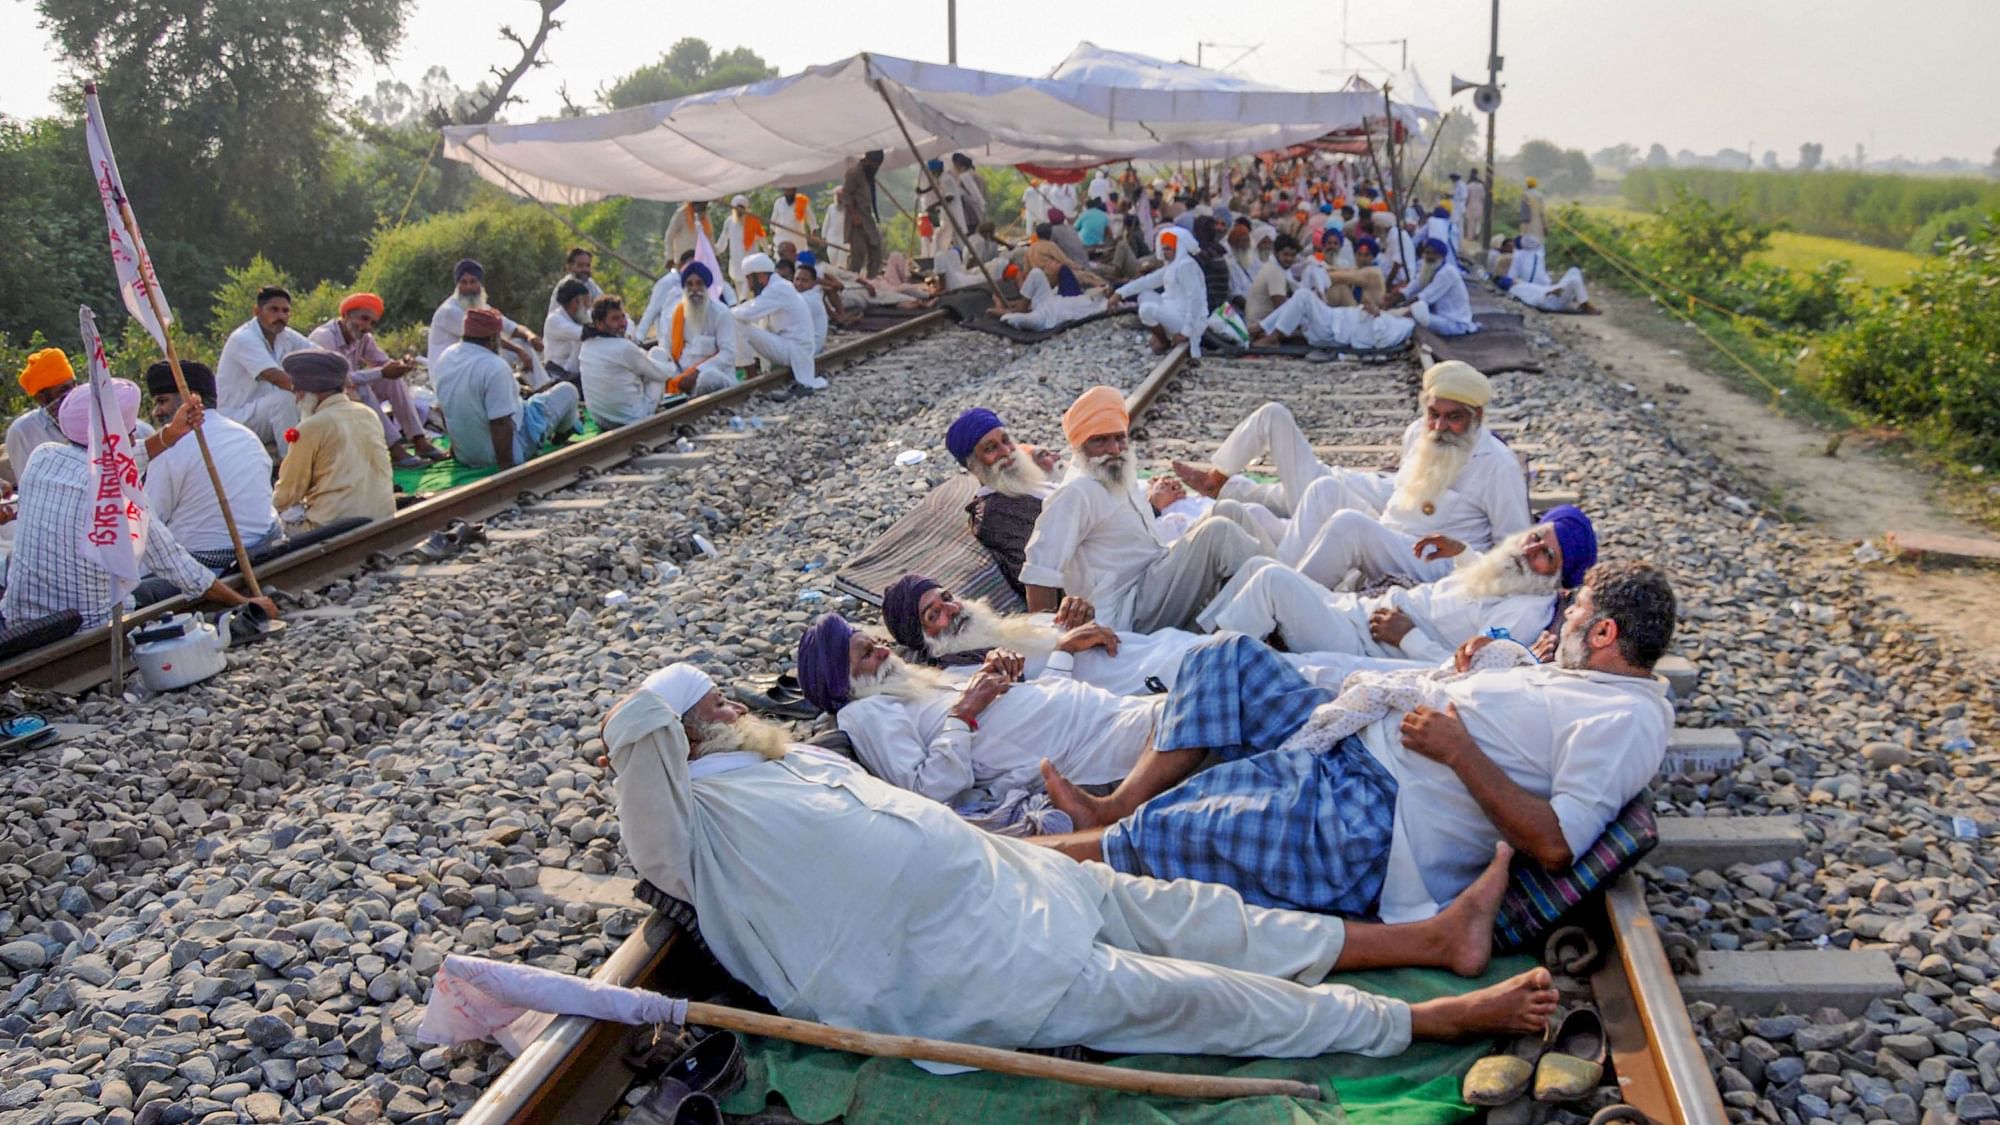 Farmers block a railway track during their protest against the new farm bills, at Devi Dass Pura village, about 20 kilometers from Amritsar, Friday, 25 September.